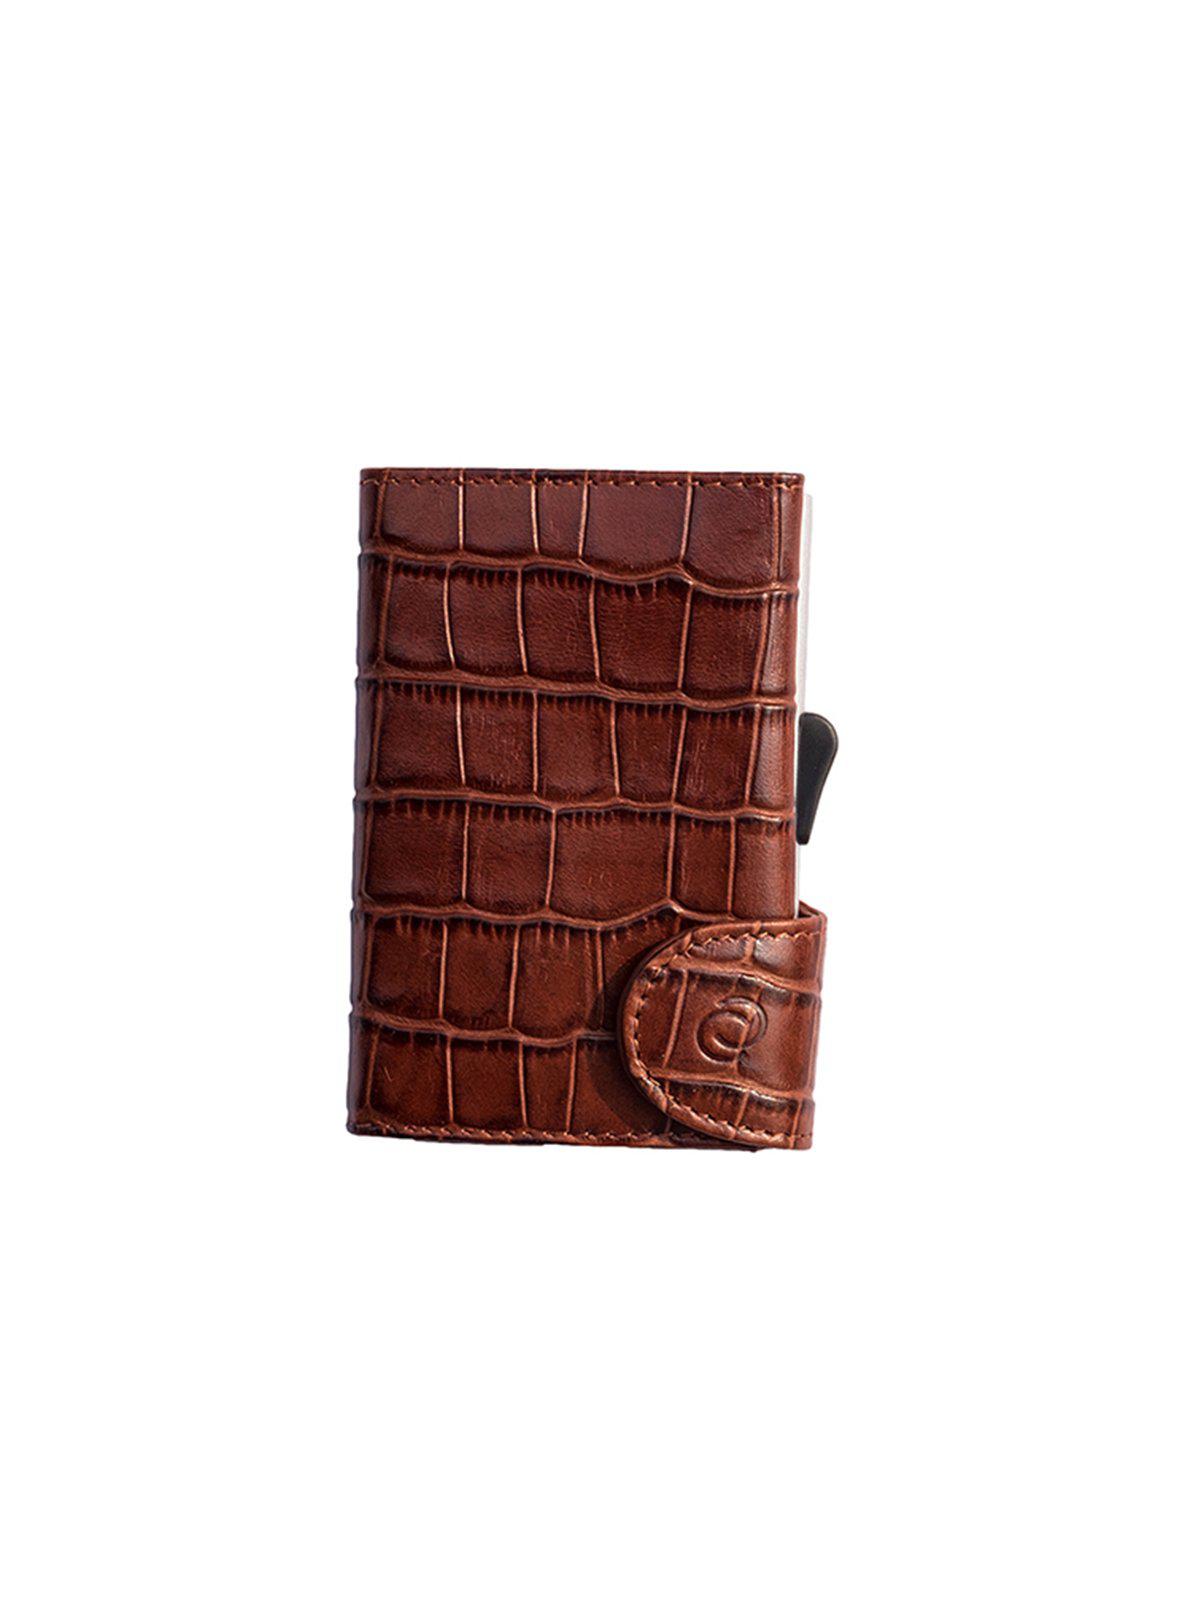 C-Secure Croco Leather RFID Wallet Brown - MORE by Morello Indonesia